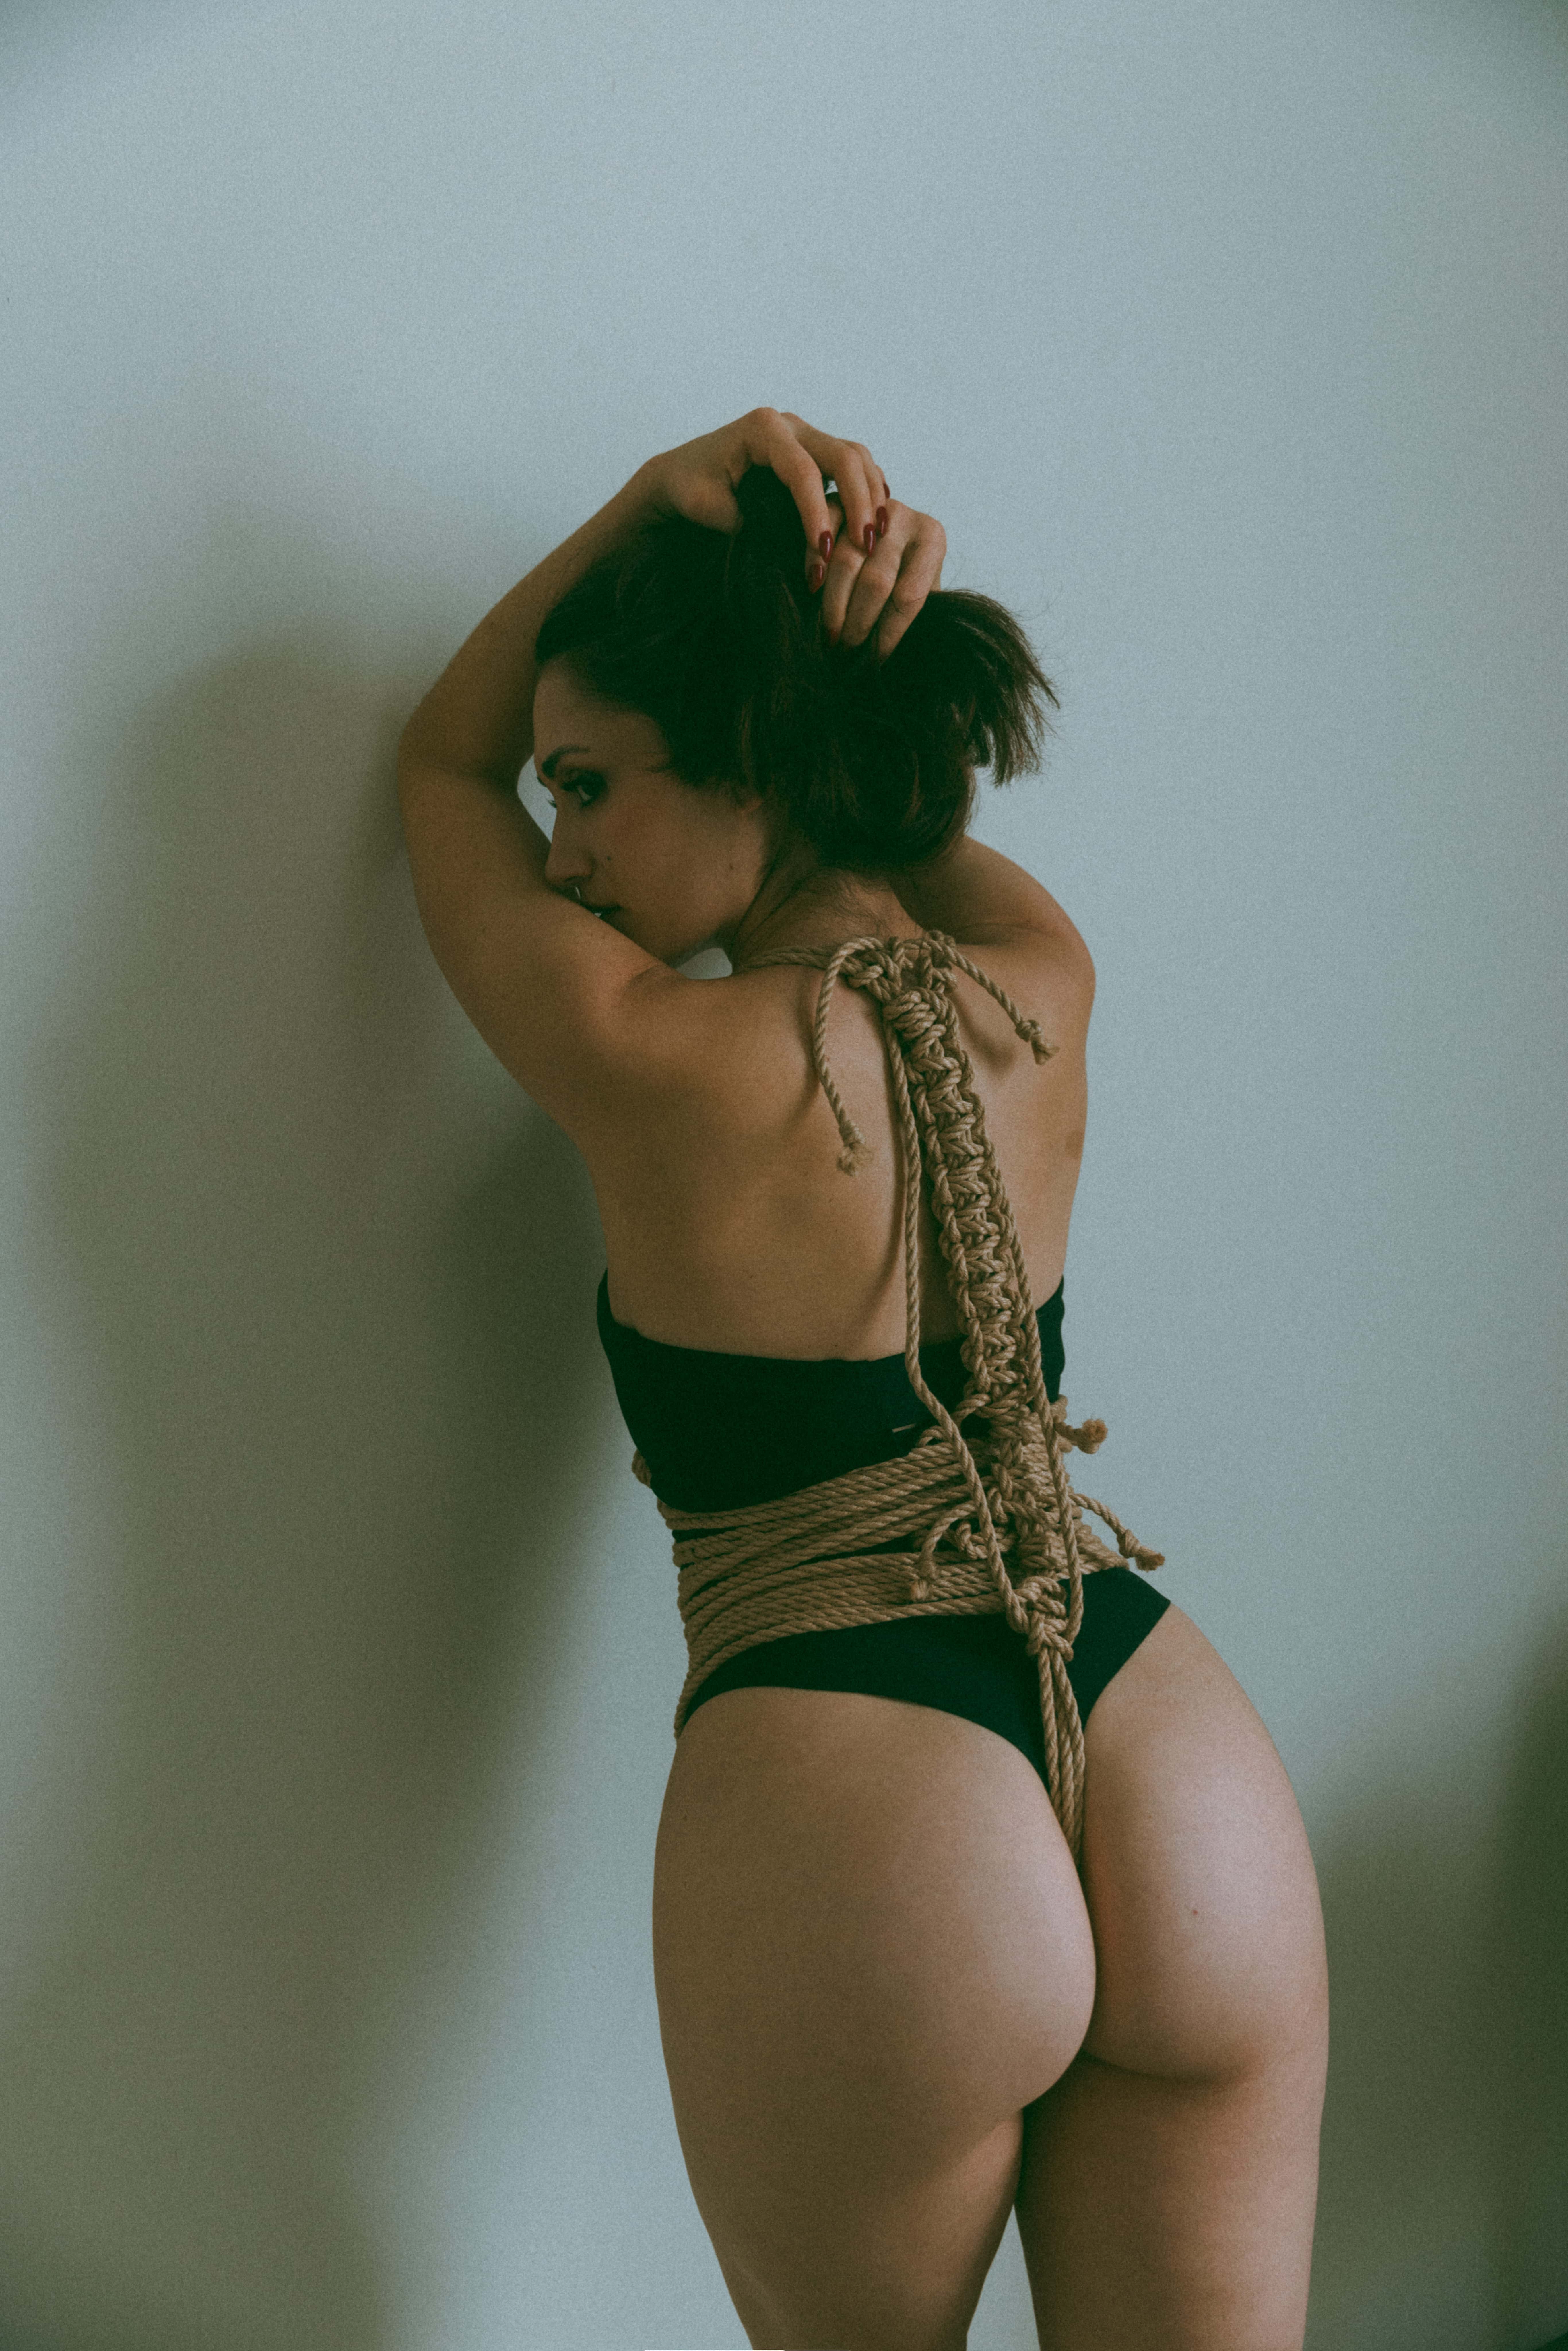 the back side of a woman leaning against a wall with ropes tied around her waist and torso